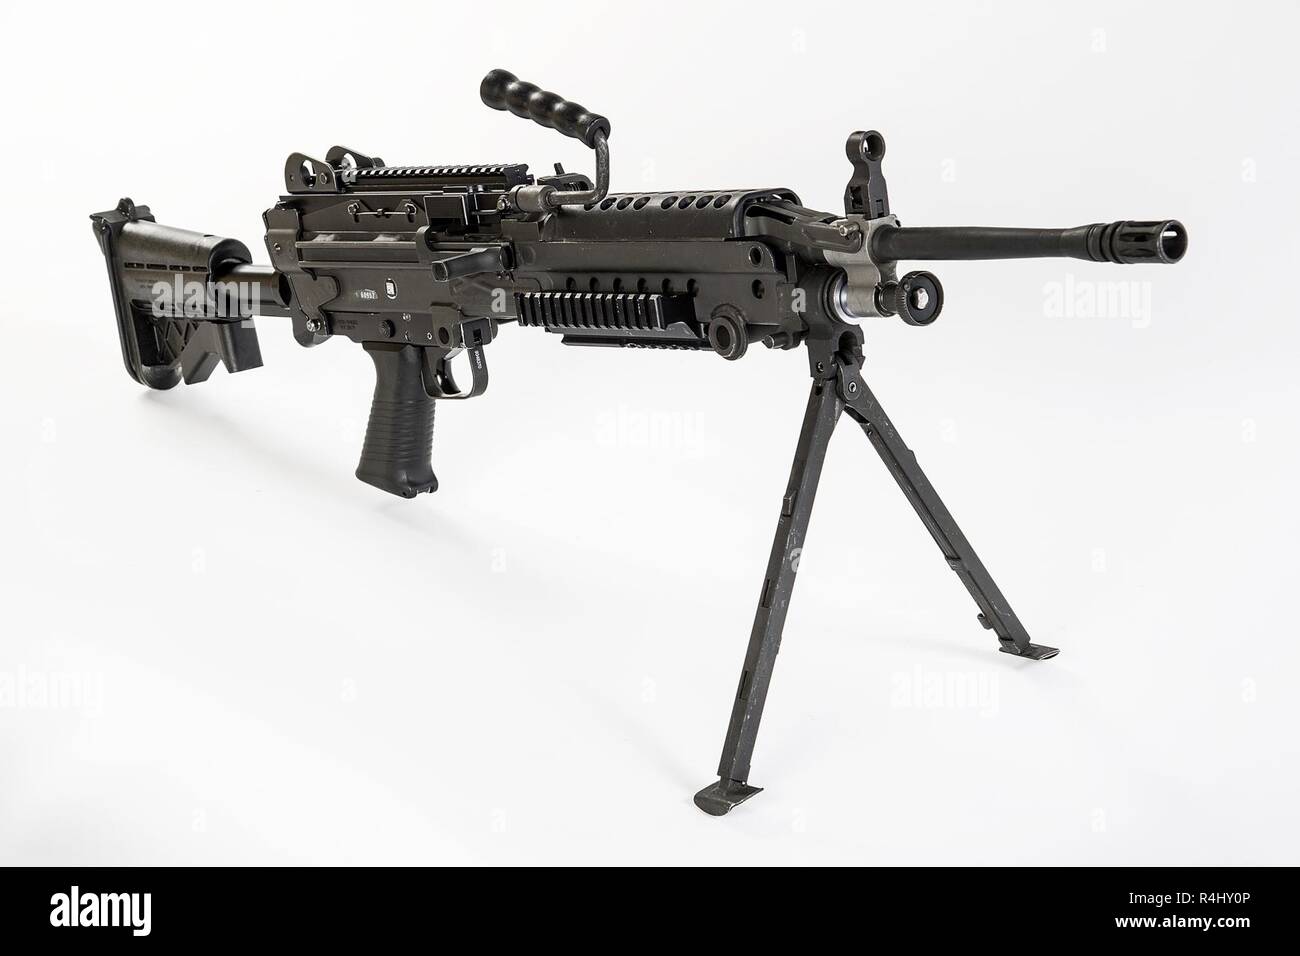 The M249 light machine gun, formerly designated the M249 Squad Automatic Weapon (SAW) and formally written as Light Machine Gun, 5.56 mm, M249, is the American adaptation of the Belgian FN Minimi, a light machine gun manufactured by the Belgian company FN Herstal (FN). The weapon was introduced in 1984 after being judged the most effective of a number of candidate weapons to address the lack of automatic firepower in small units. The M249 provides infantry squads with the high rate of fire of a machine gun combined with accuracy and portability approaching that of a rifle.    The M249 is gas o Stock Photo